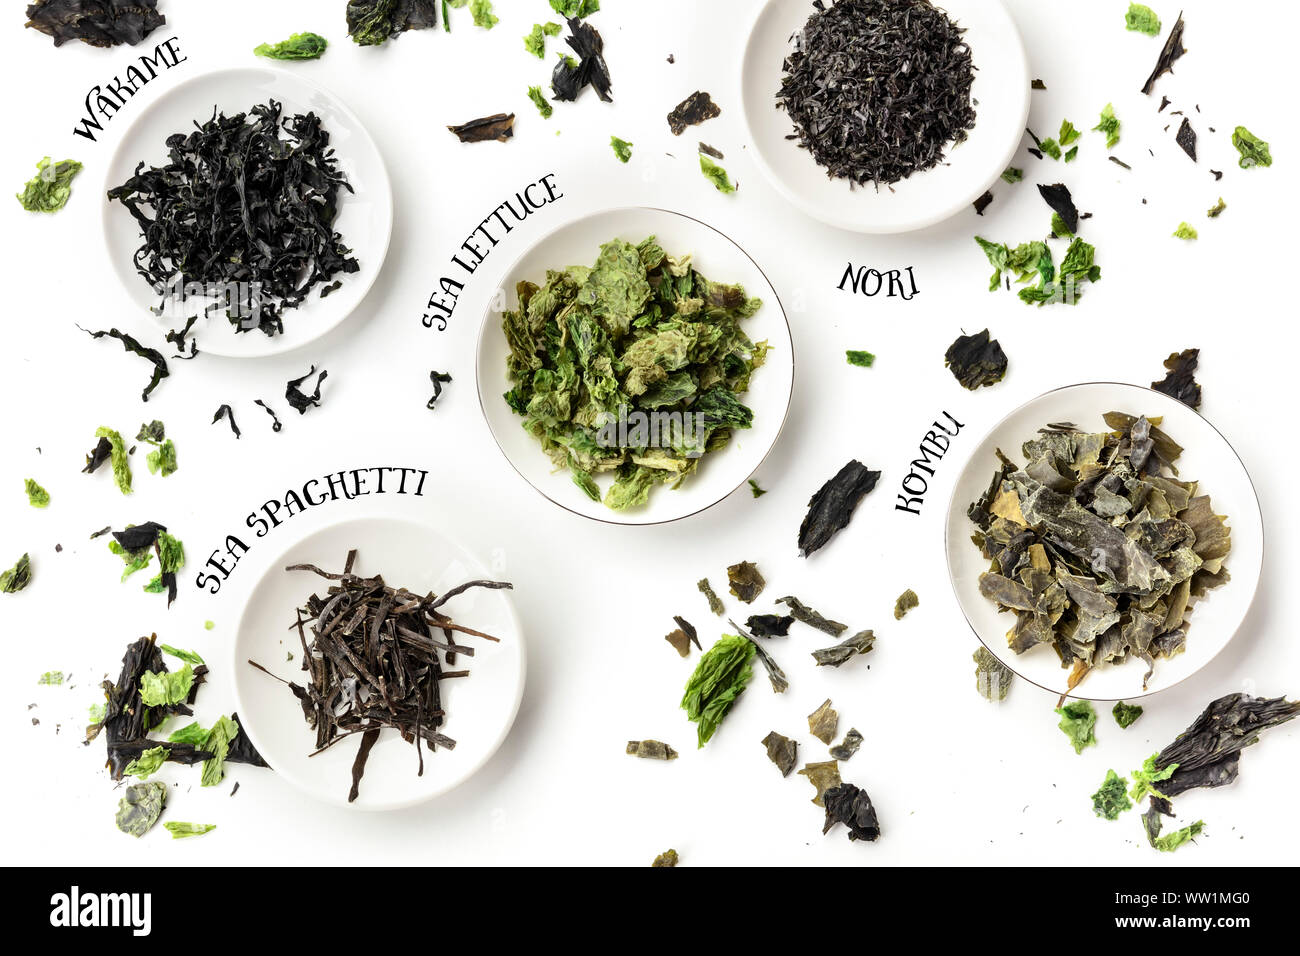 Dry seaweed, sea vegetables, with their names, shot from above on a white background Stock Photo